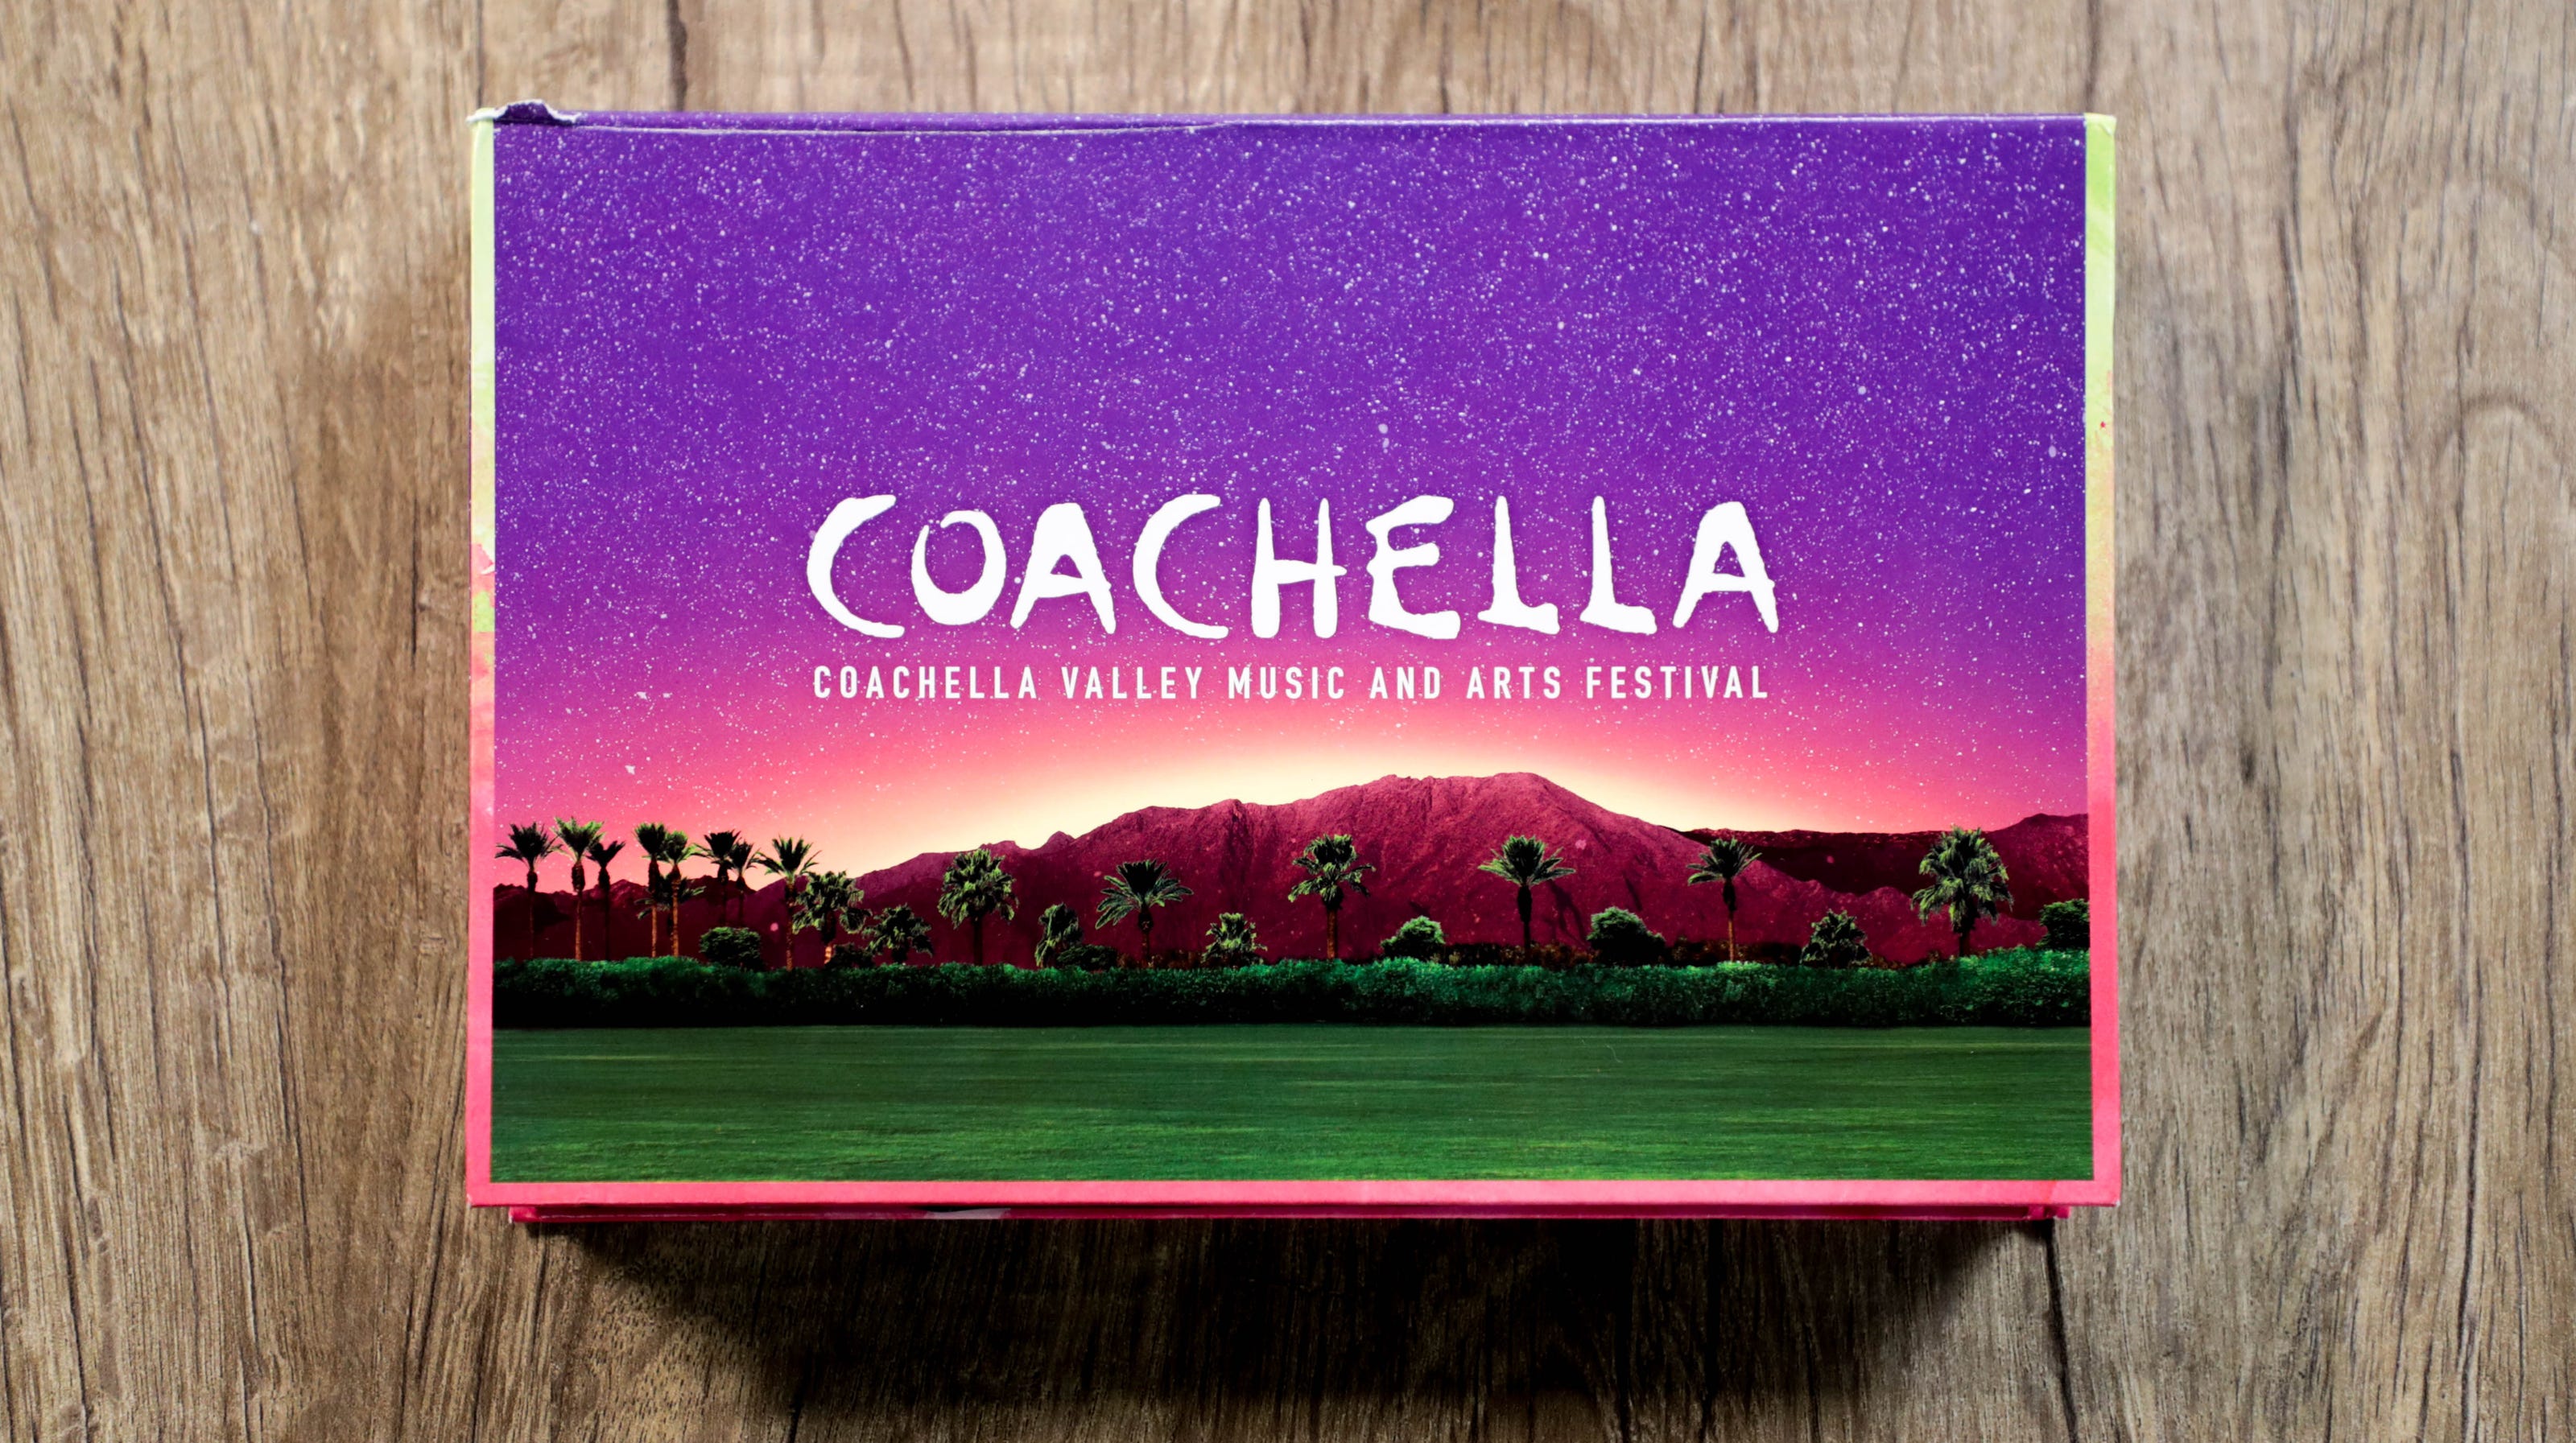 How to get passes to Coachella Weekend 1